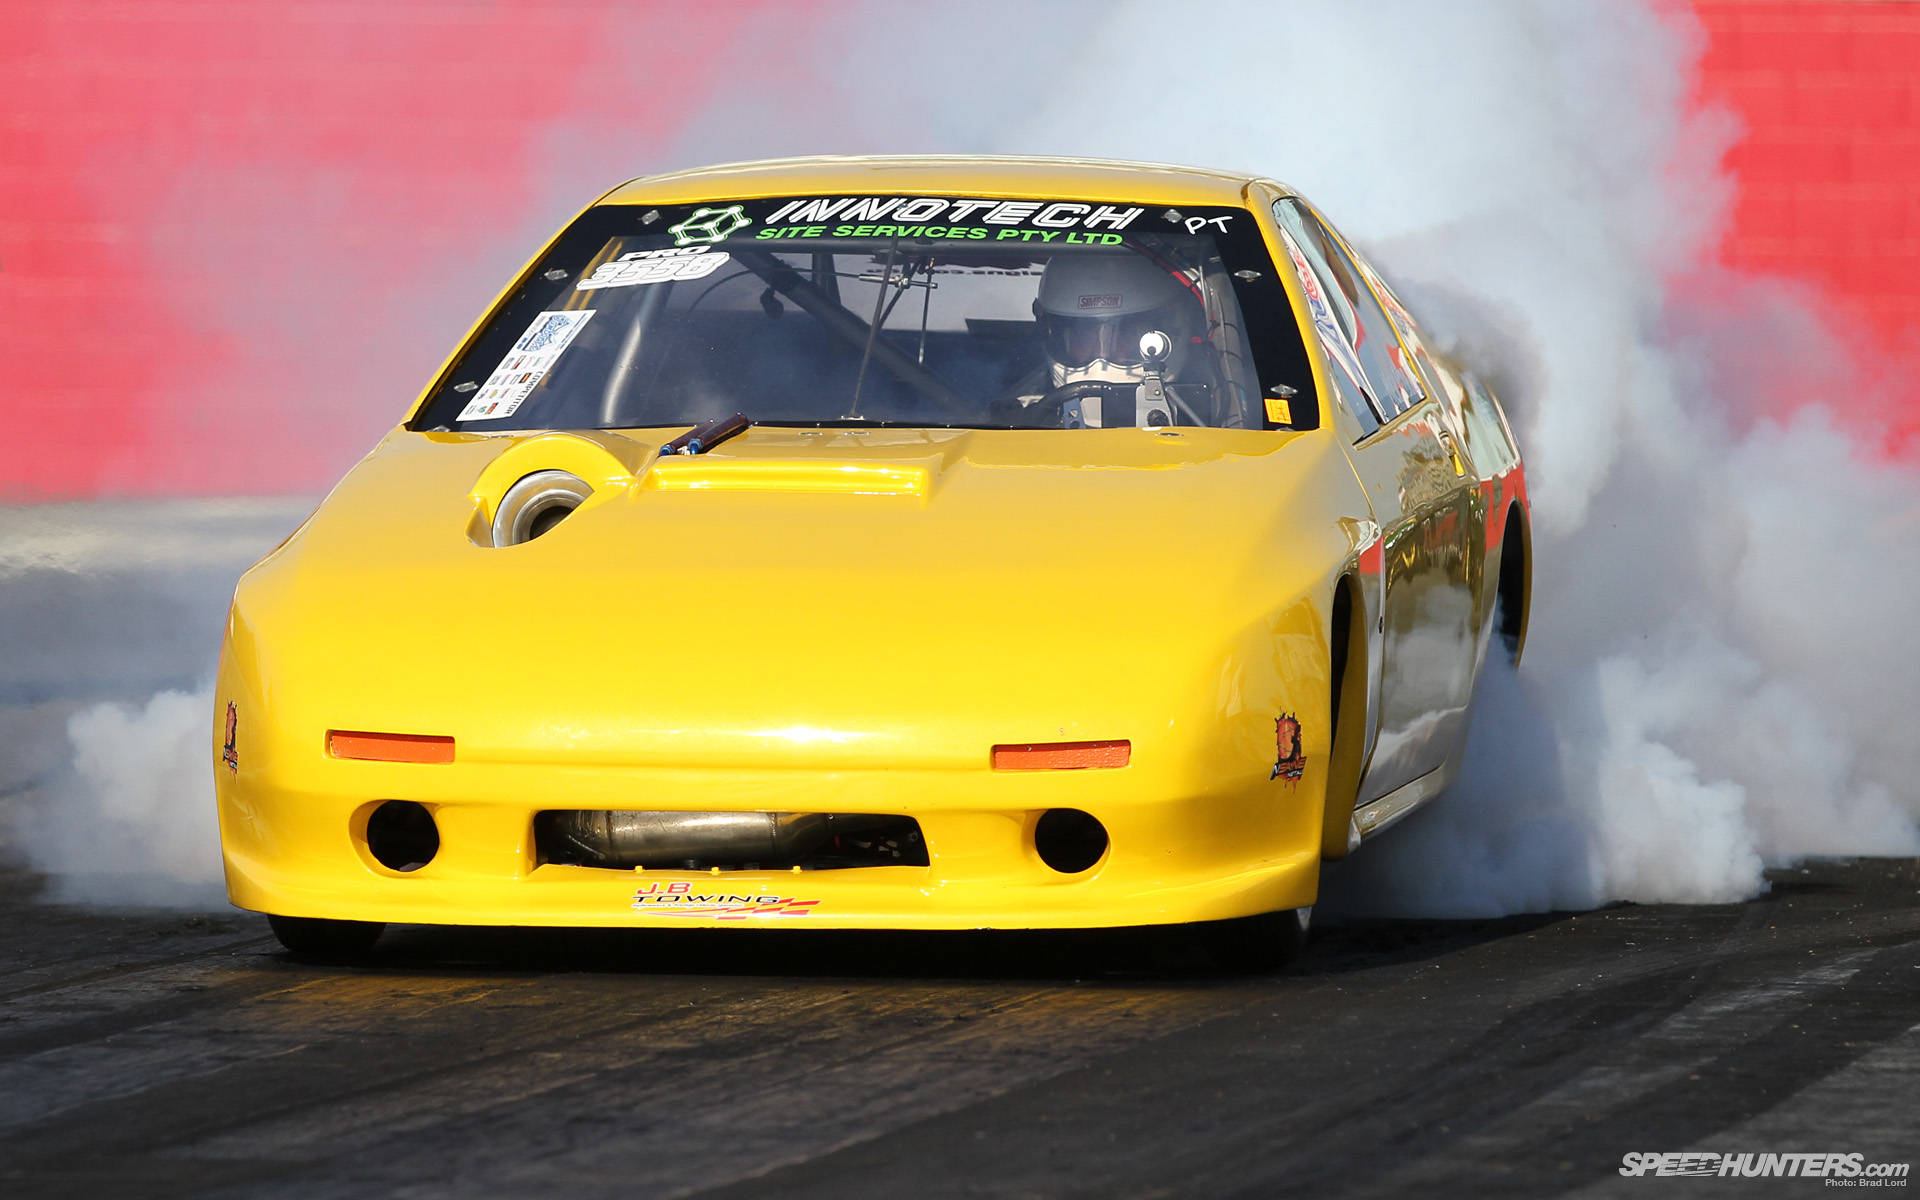 High-intensity Drag Racing With Yellow Mazda Rx-7